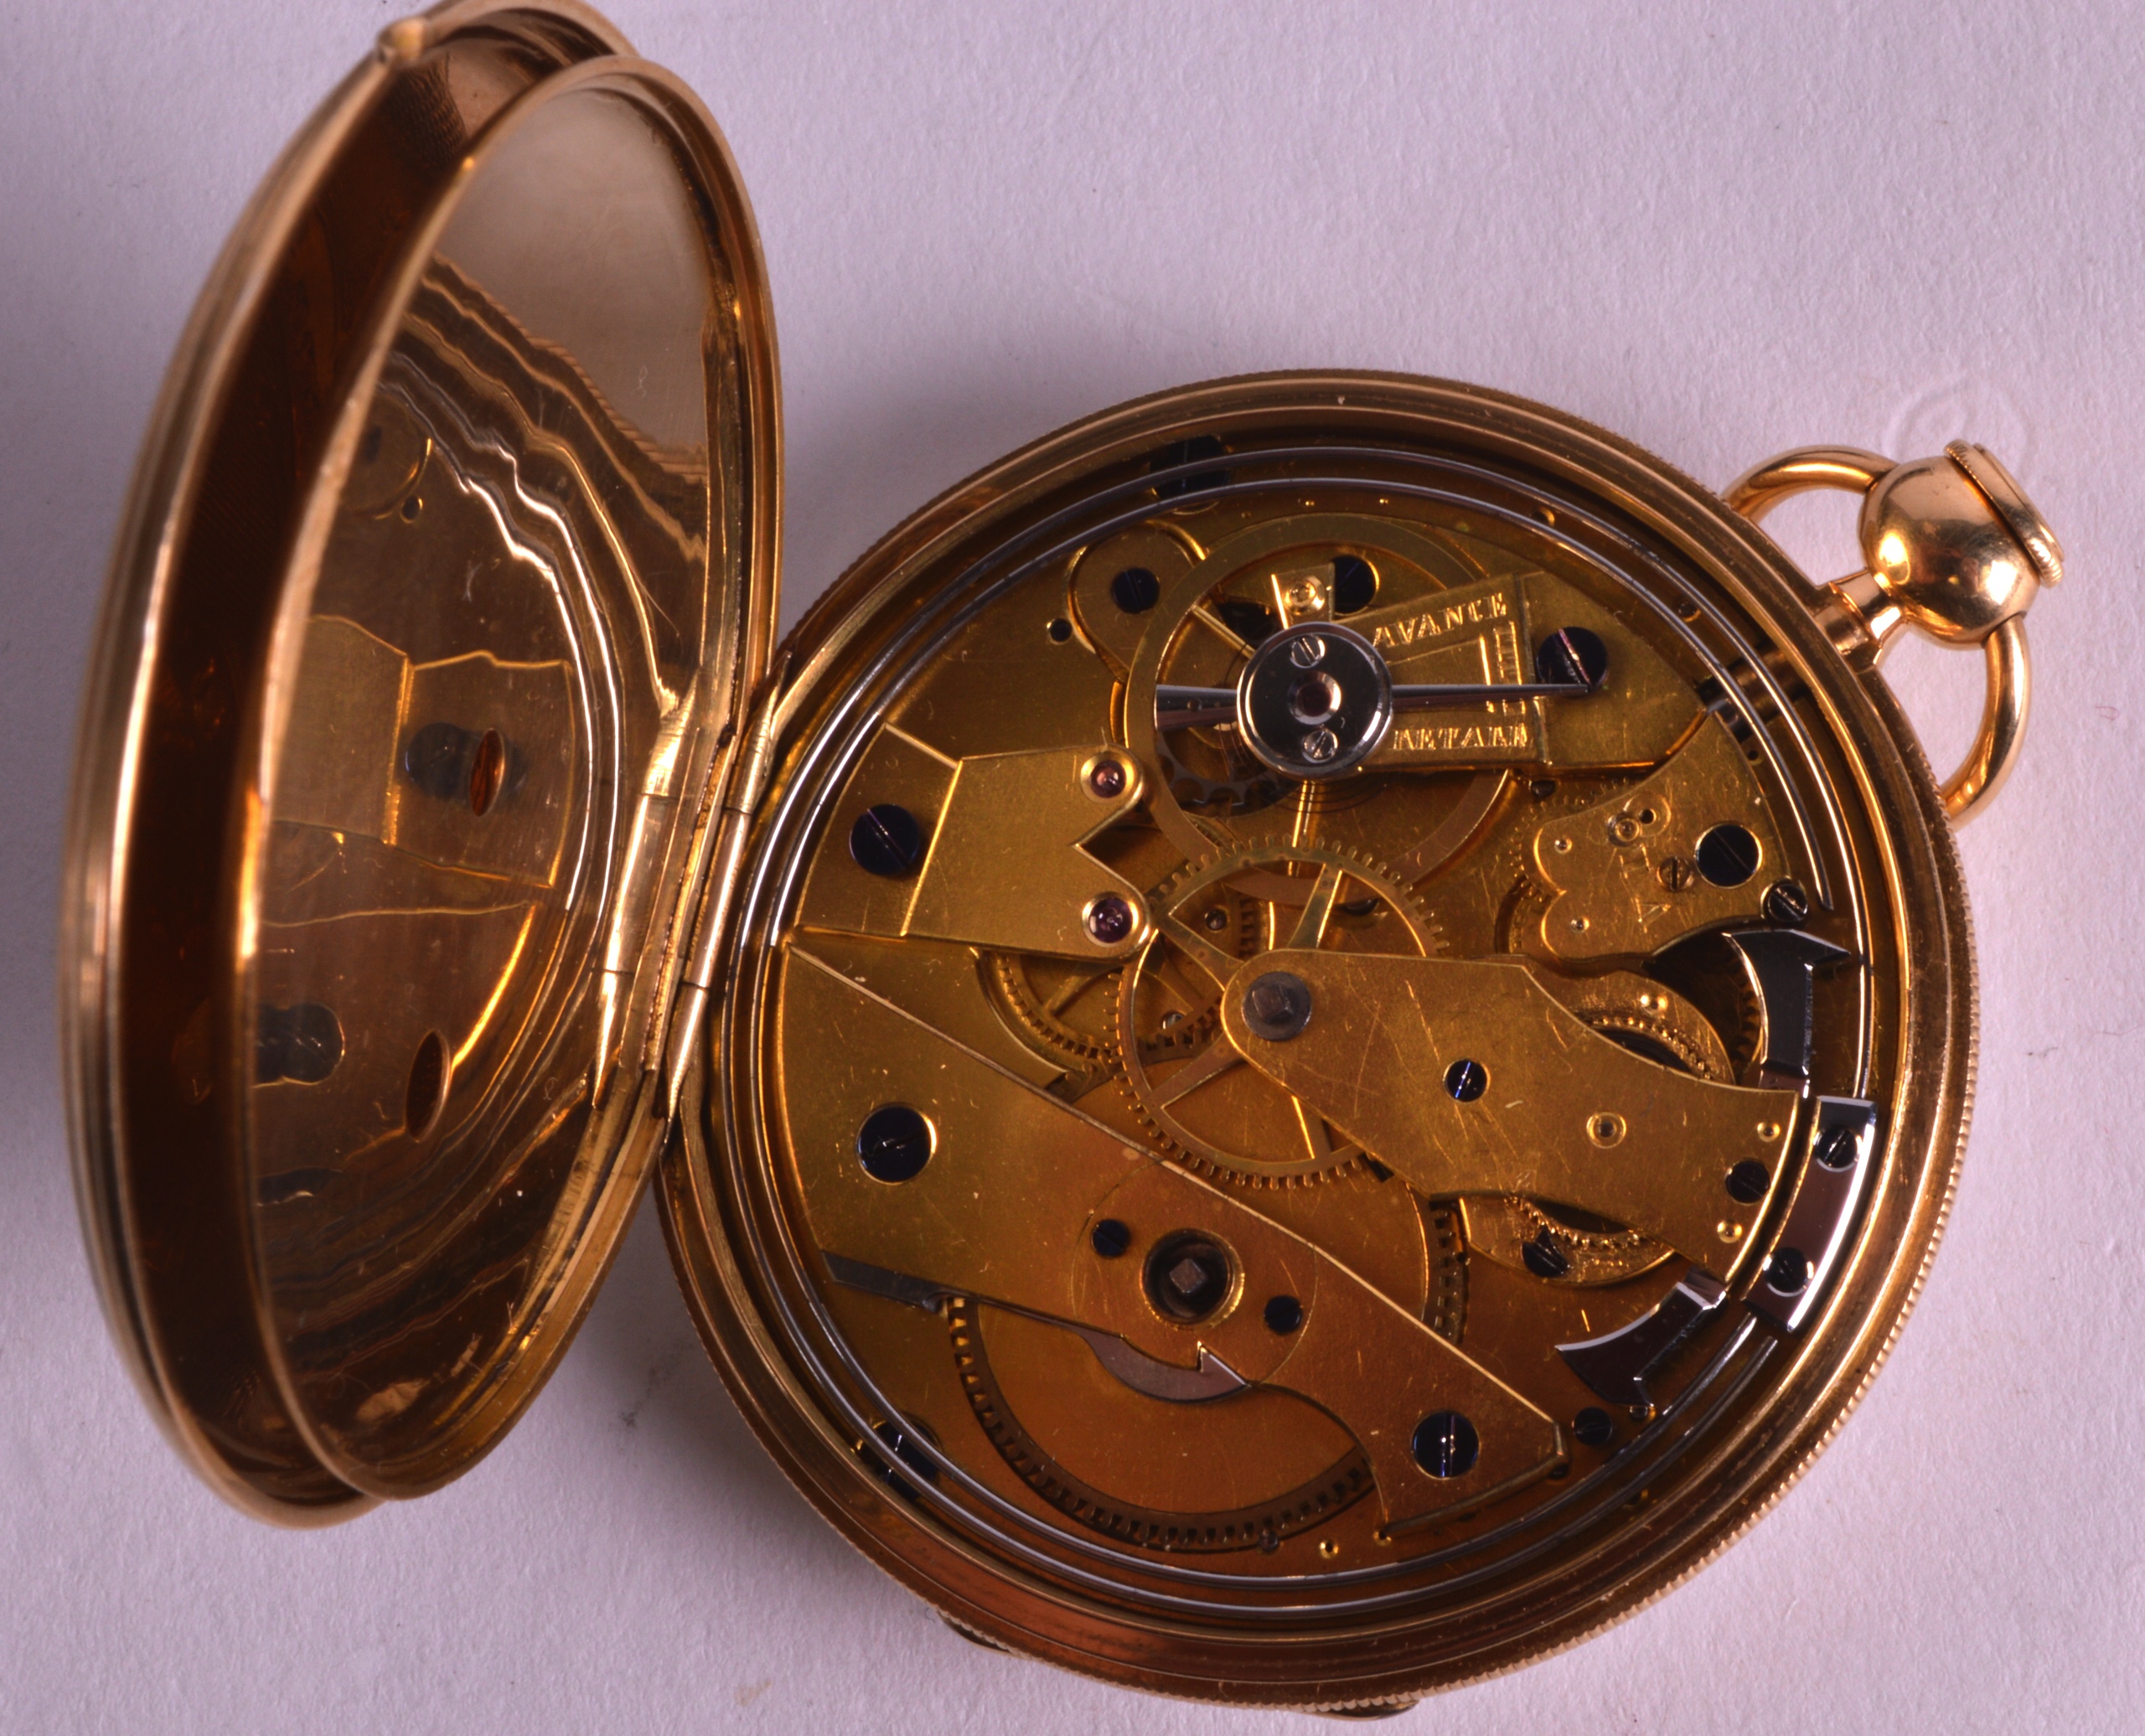 A FINE 19TH CENTURY FRENCH 18CT YELLOW GOLD REPEATING POCKET WATCH in original fitted box. (2) - Image 3 of 3